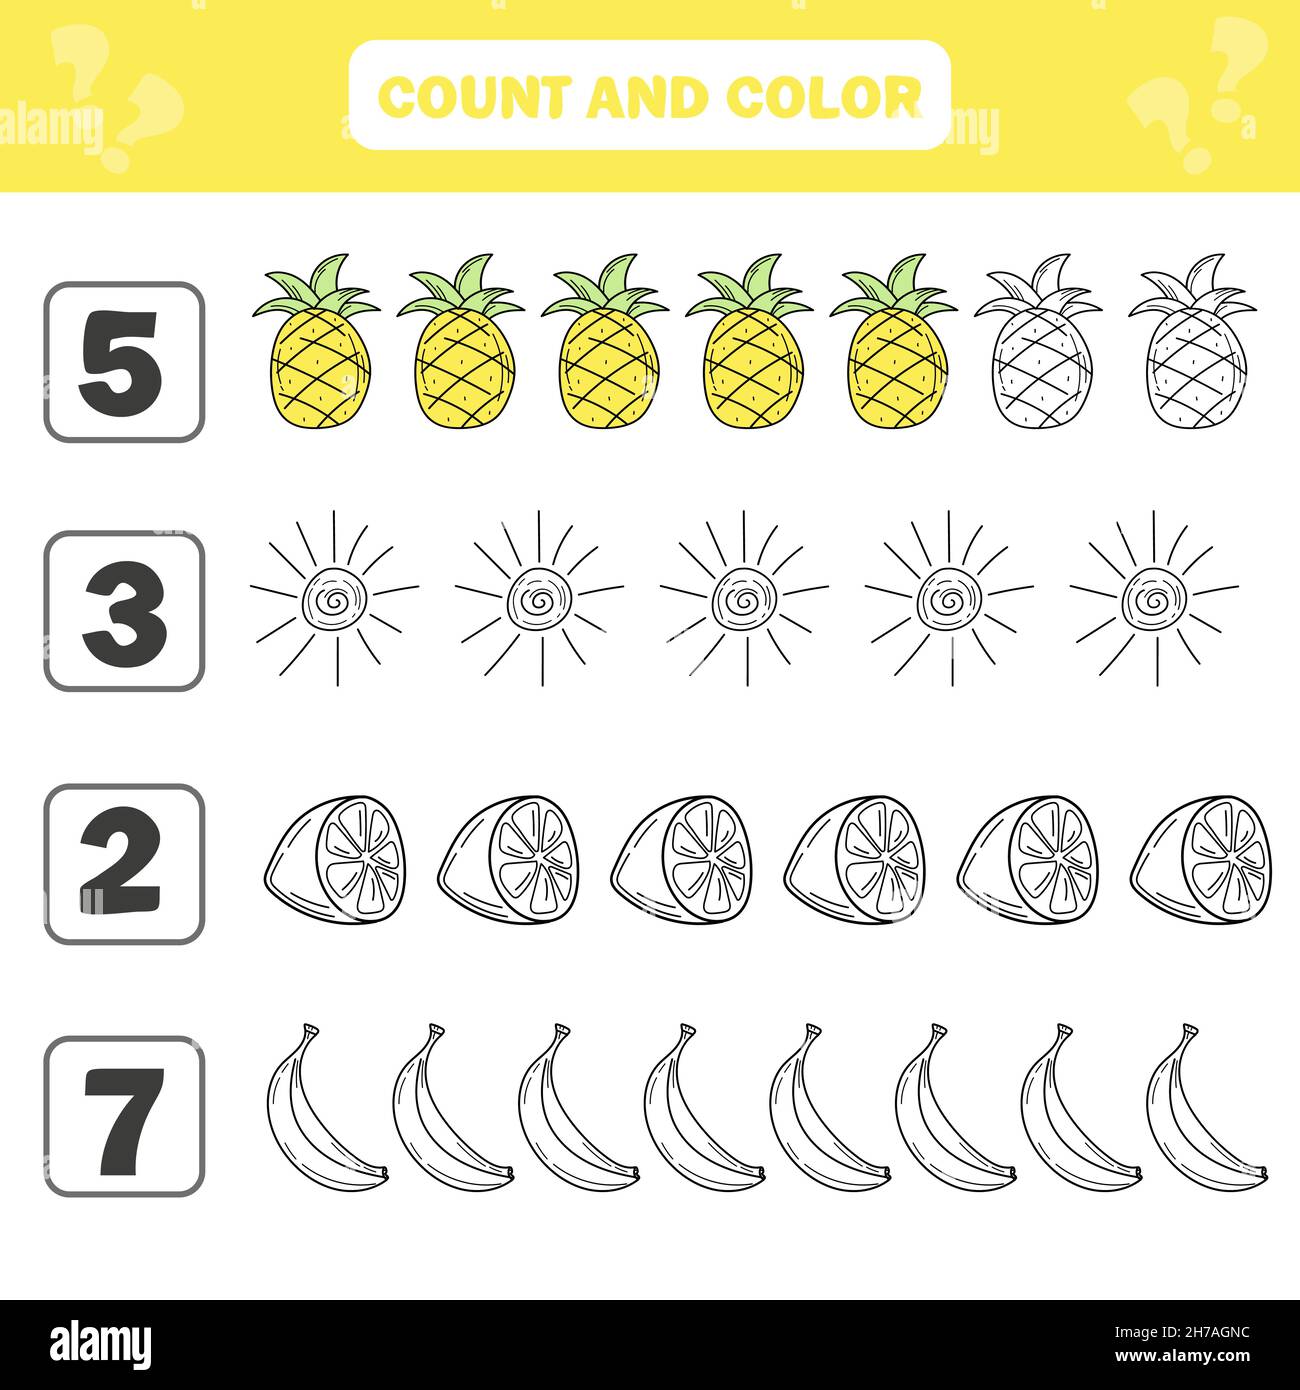 count and color game for preschool children summer items and fruits worksheet for the development of mathematical abilities coloring book for kids stock vector image art alamy